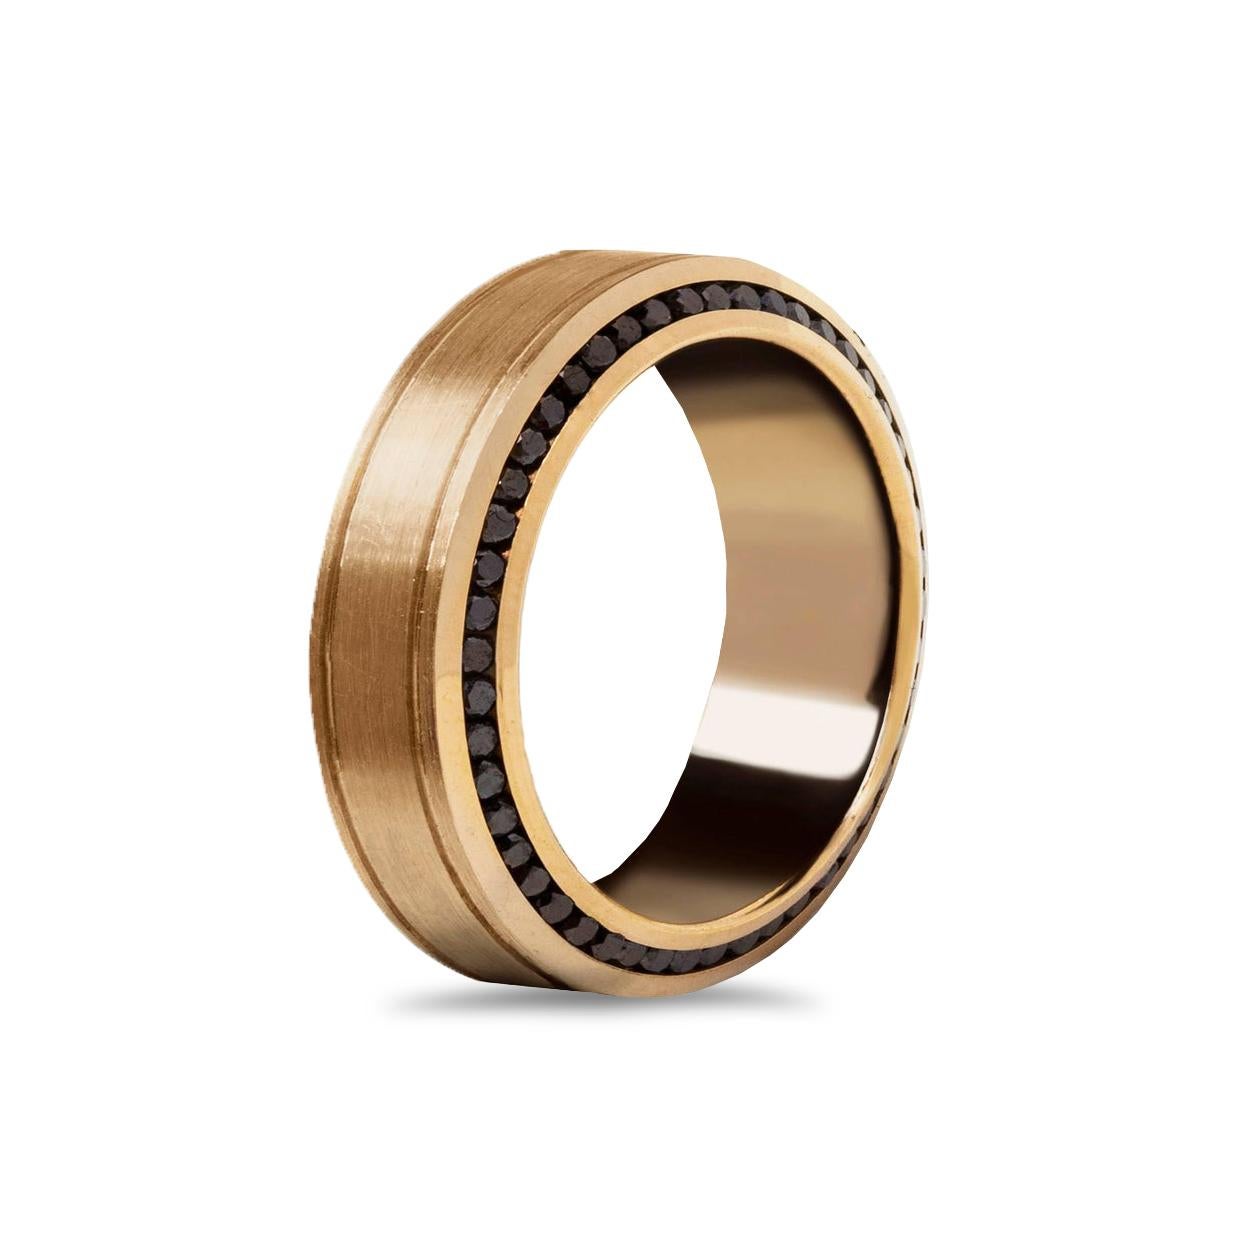 A comfort fit wedding band wrapped with black diamonds weighing 1.23 carats total; channel set on each side of the ring. Two lines finely-engraved in the middle portion of the ring and made in 18k rose gold. Gorgeous brushed inlay finish. Size 10.25